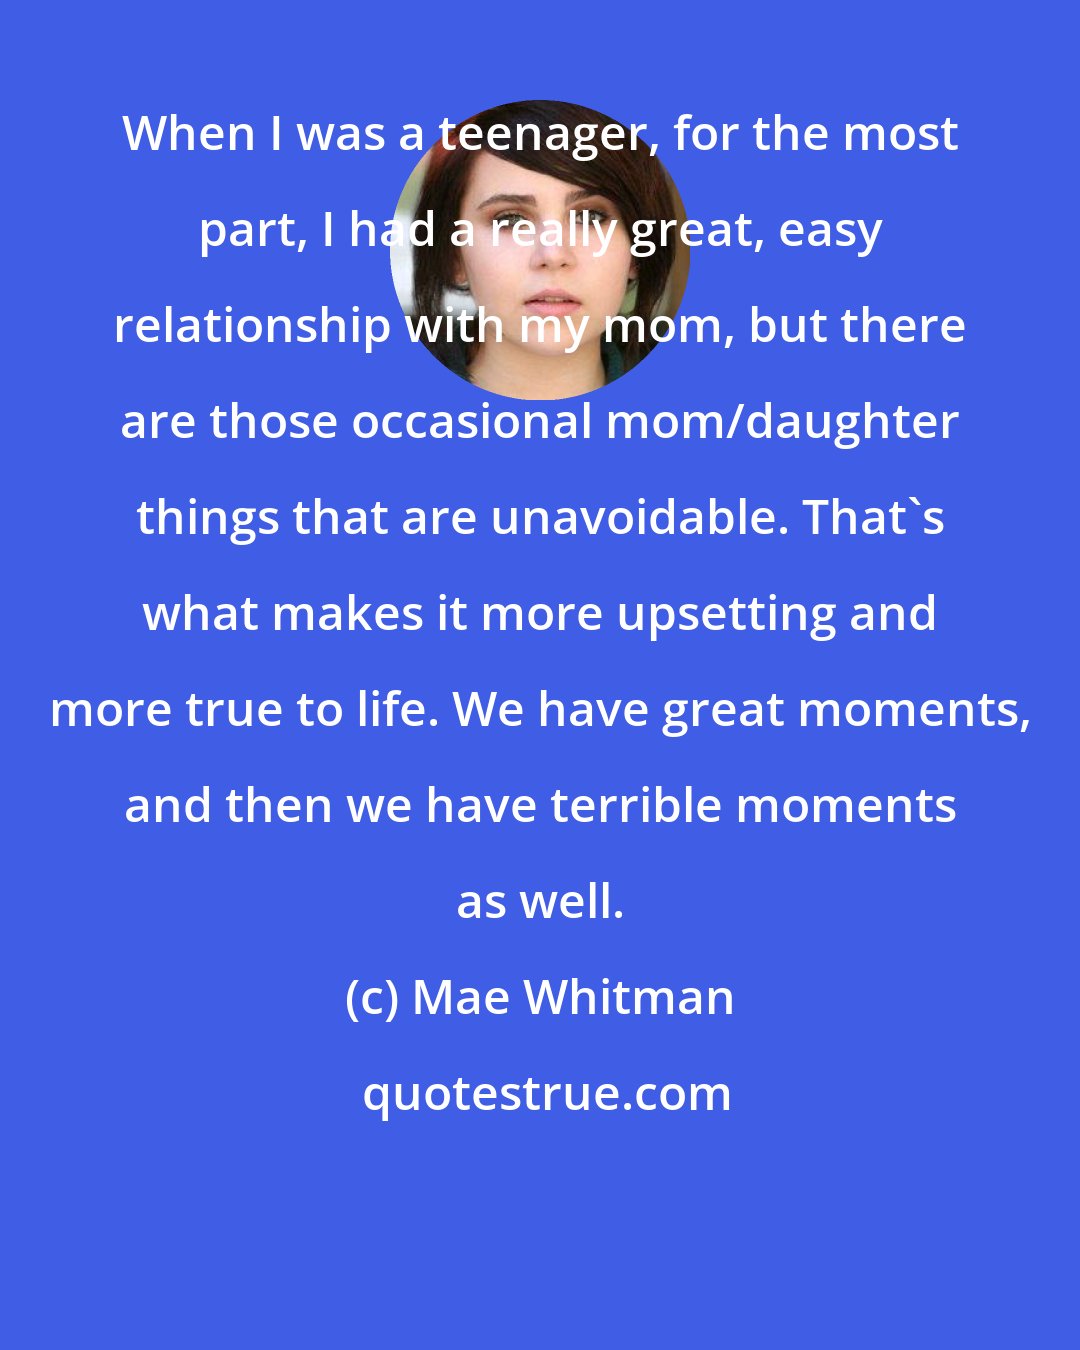 Mae Whitman: When I was a teenager, for the most part, I had a really great, easy relationship with my mom, but there are those occasional mom/daughter things that are unavoidable. That's what makes it more upsetting and more true to life. We have great moments, and then we have terrible moments as well.